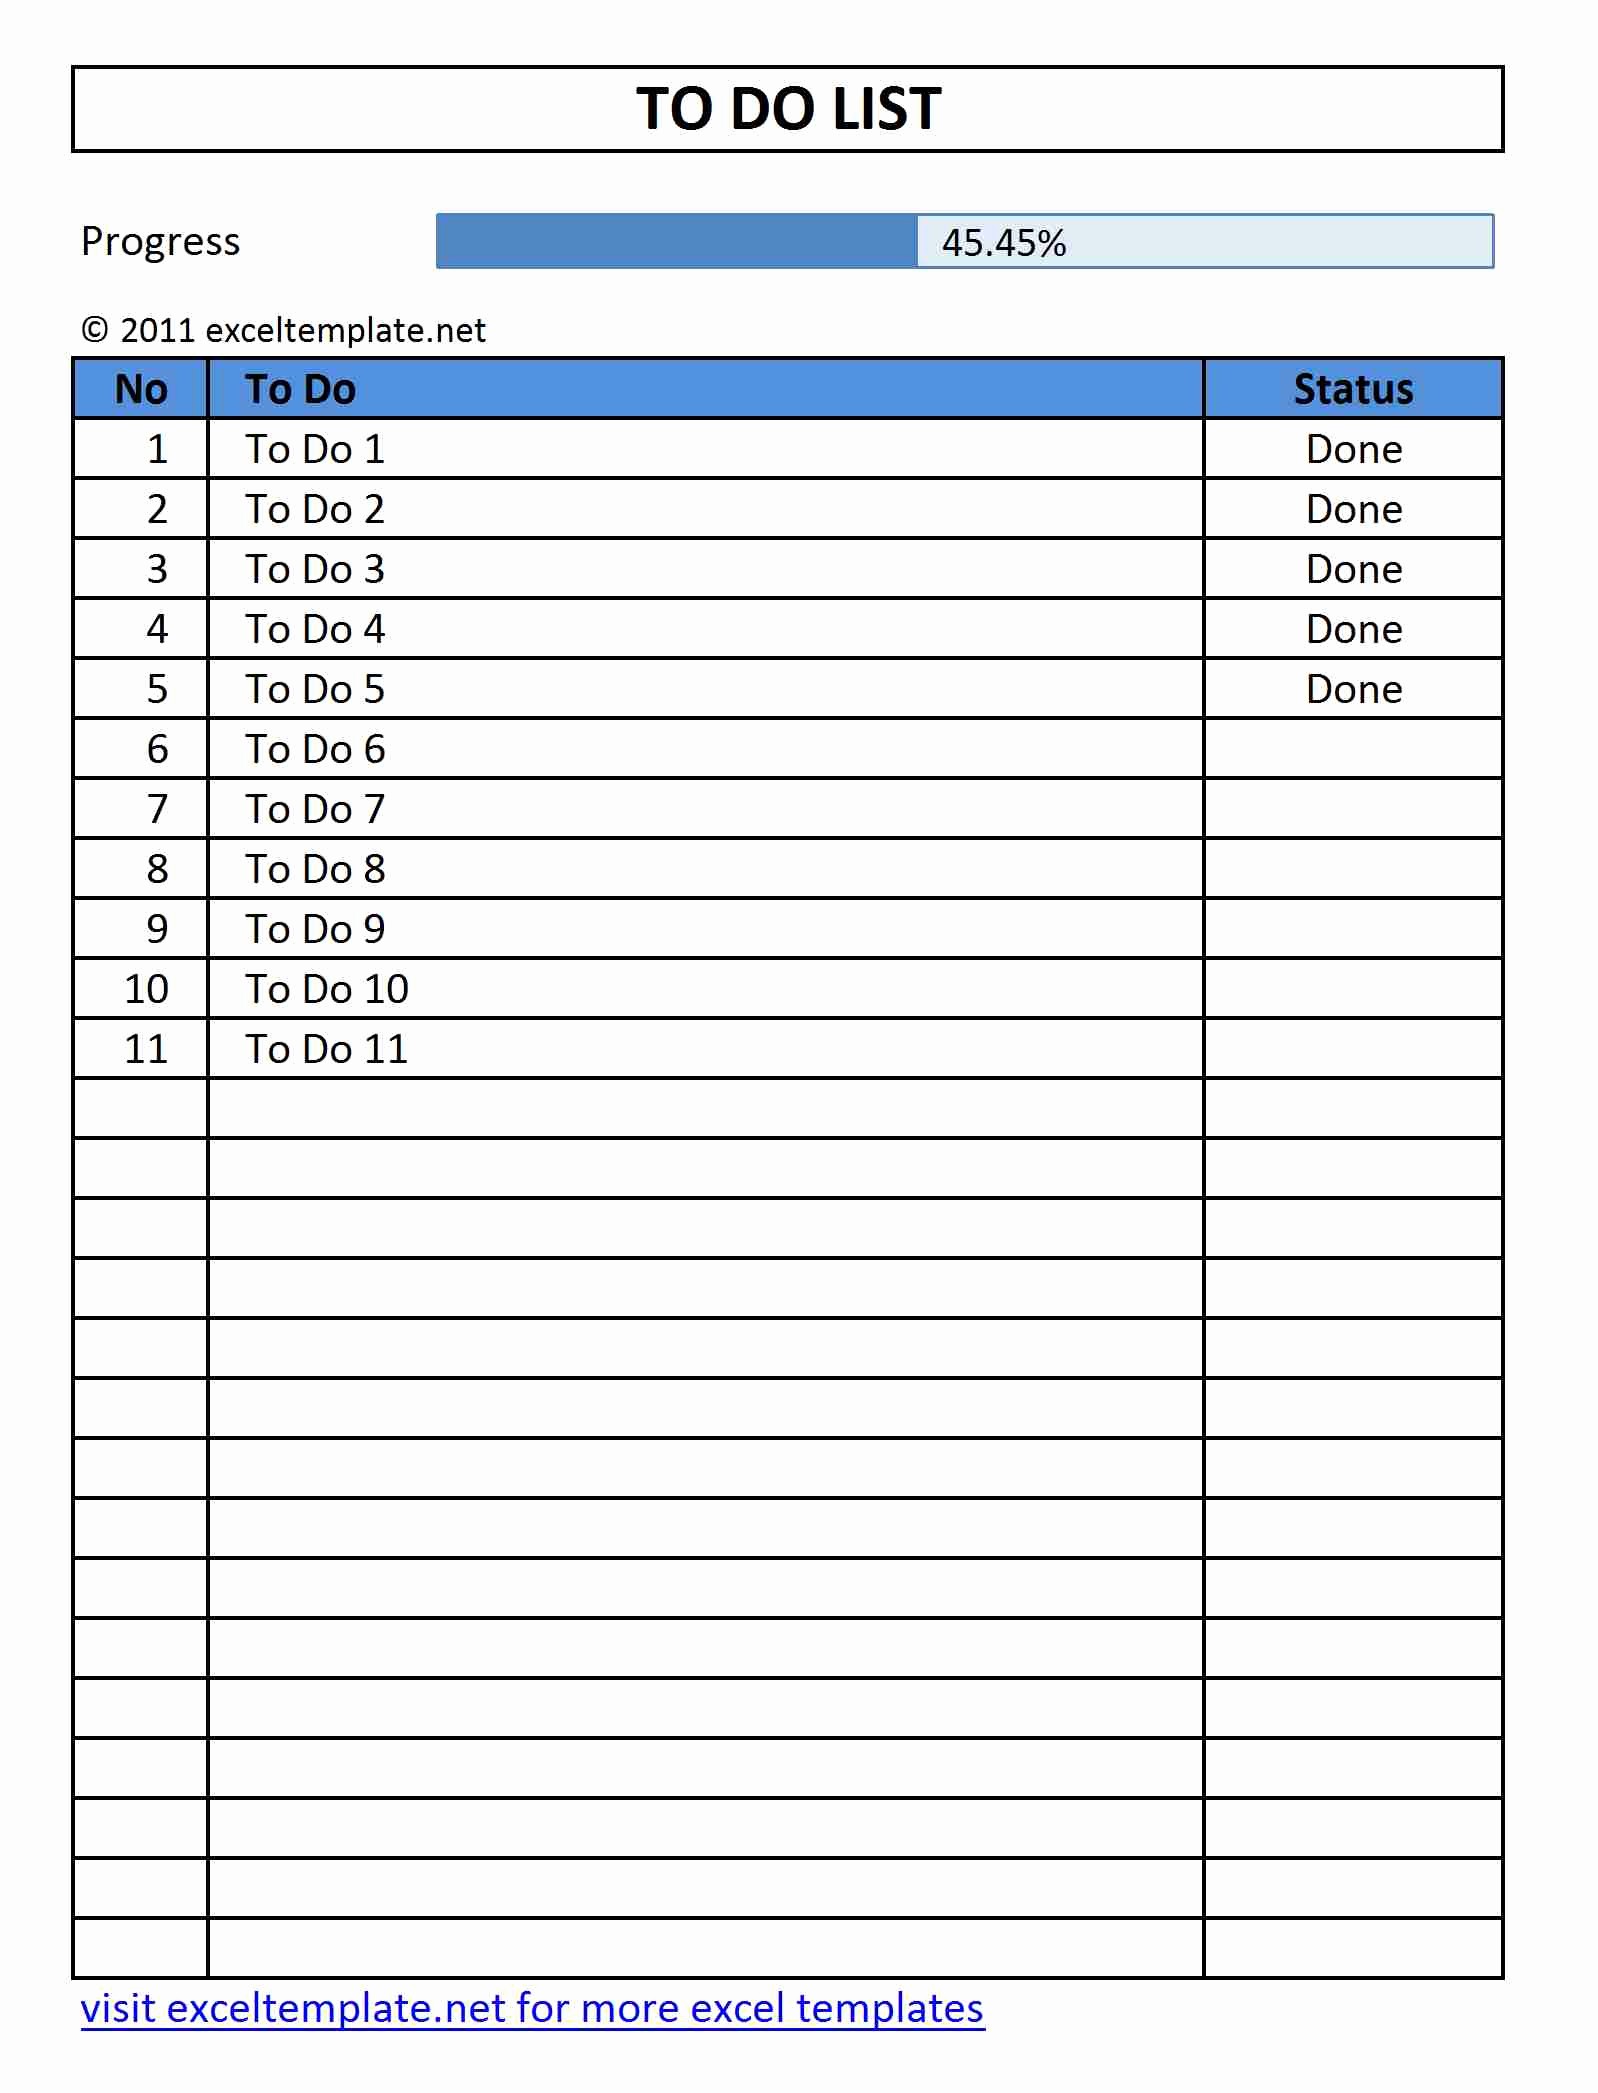 To Do List Templates Excel Best Of Simple to Do List